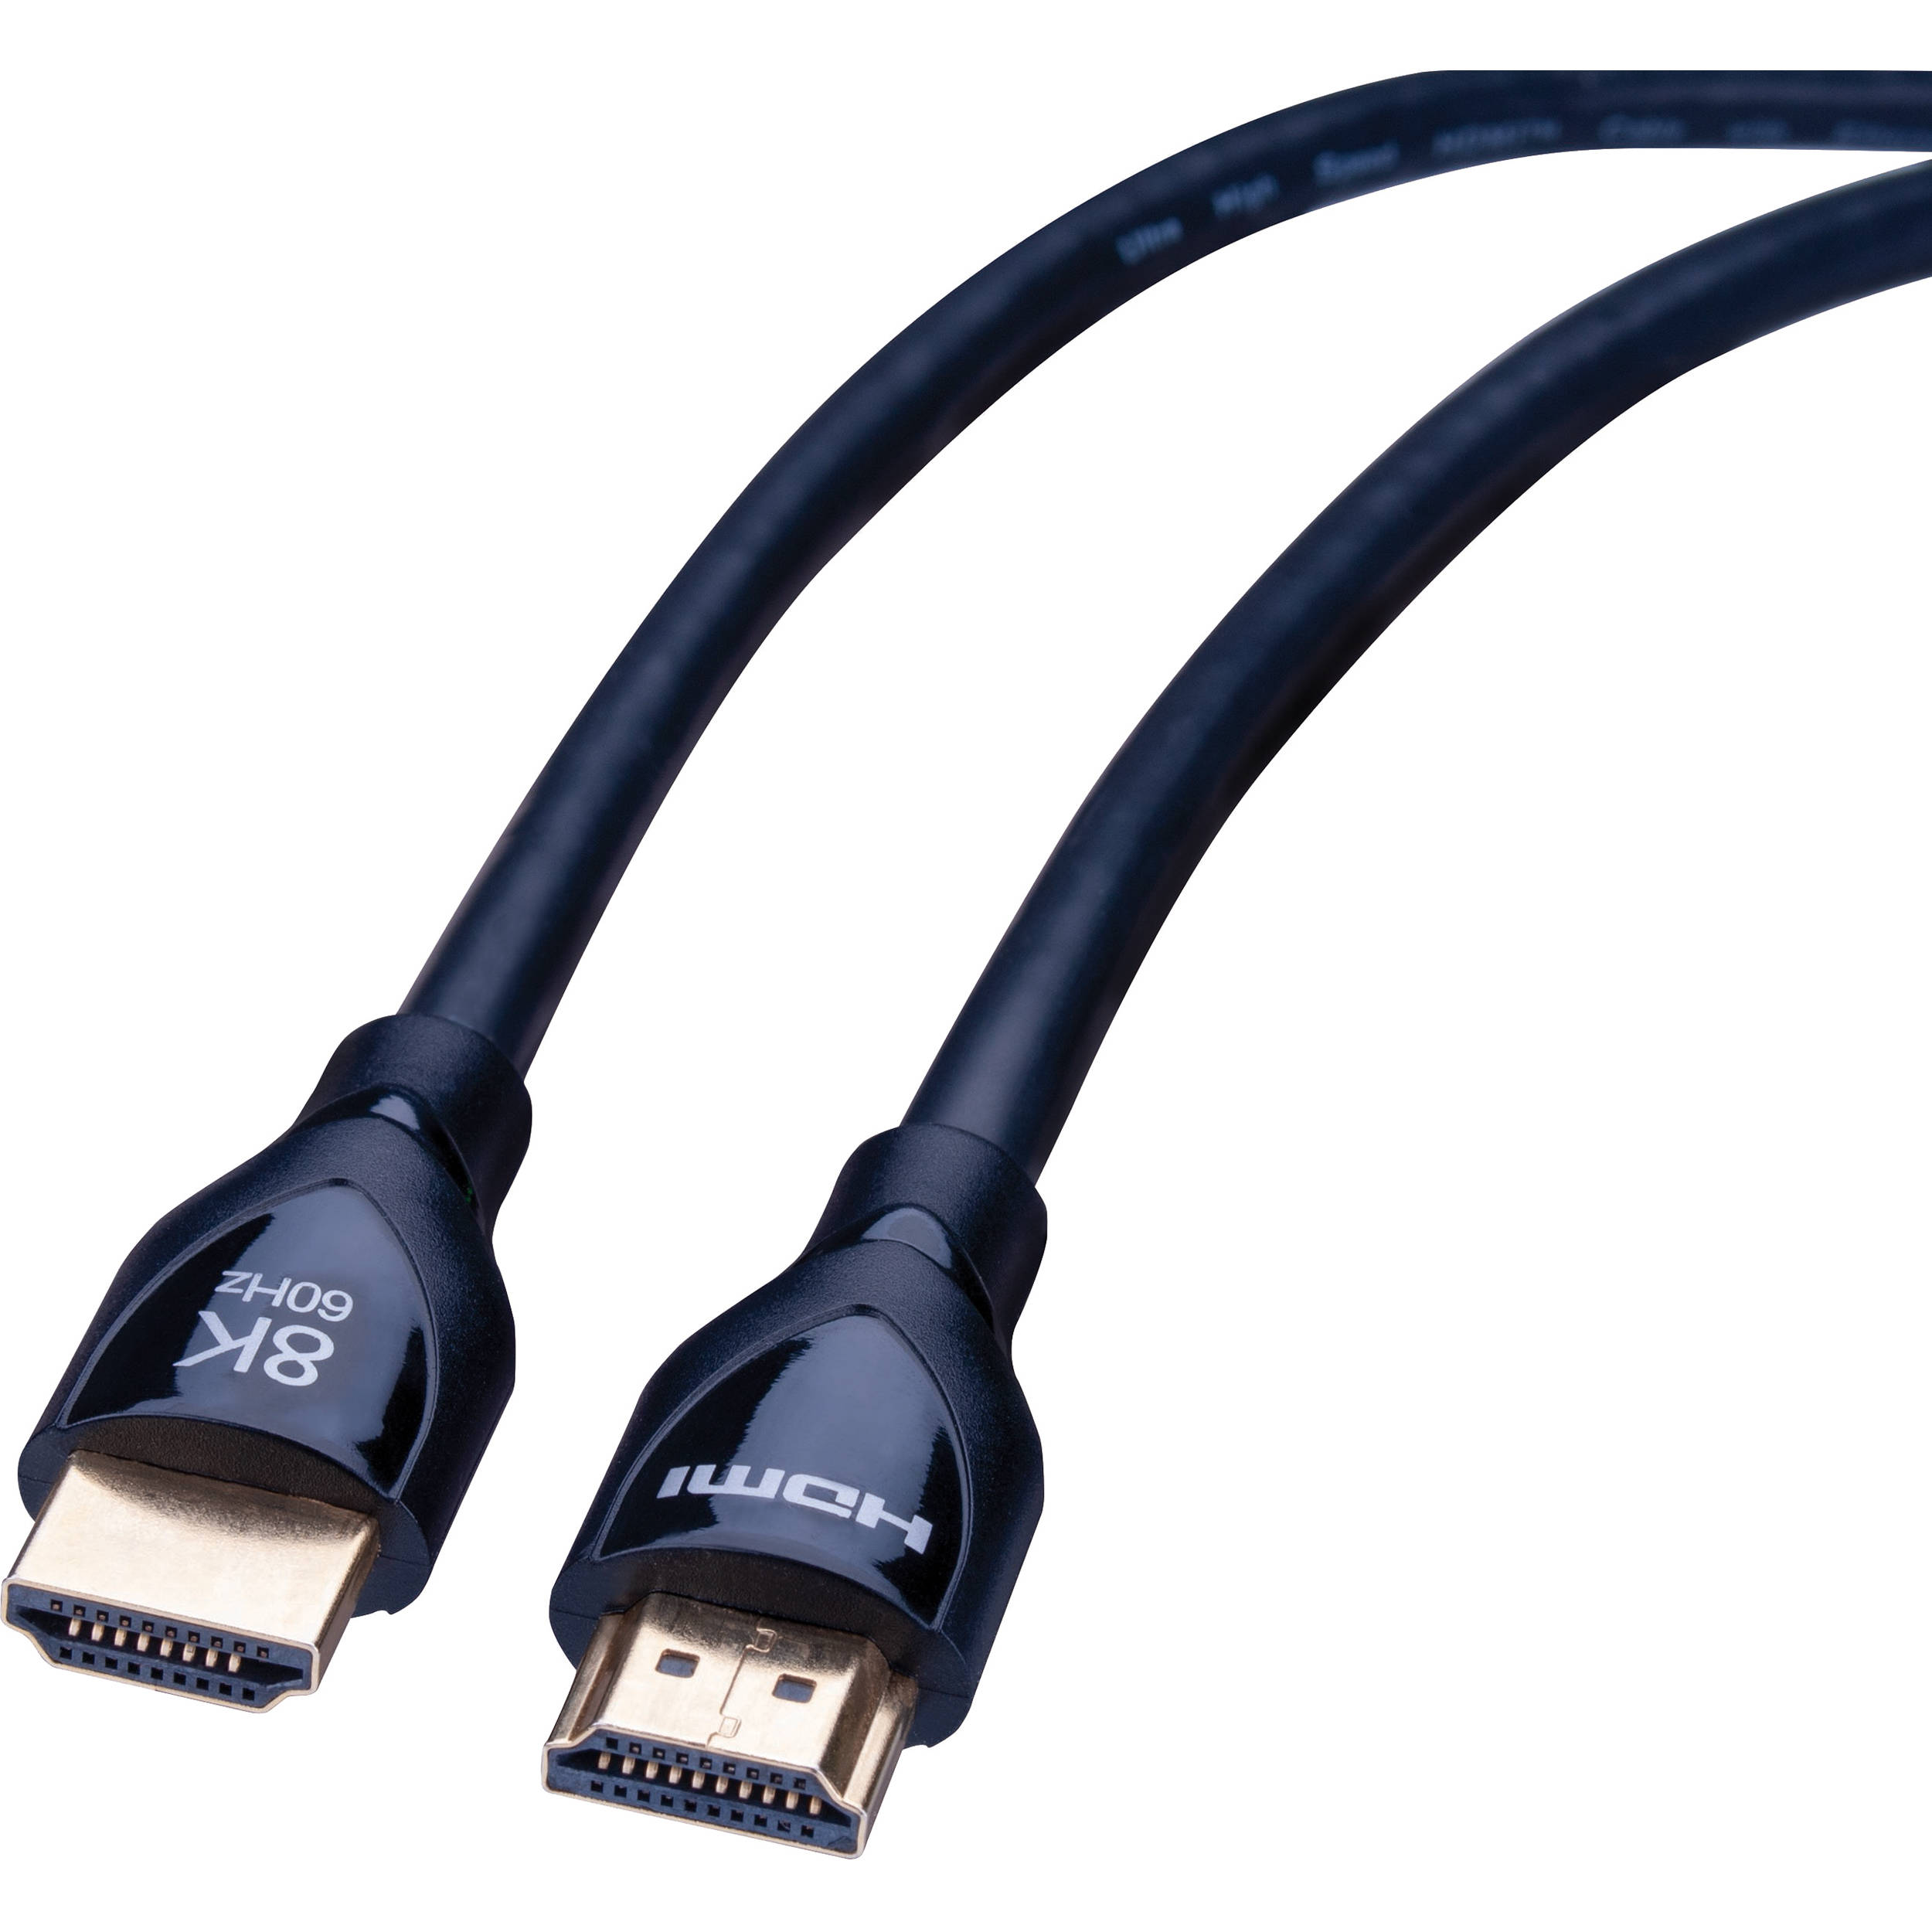 PROHD8K03 | 3' Pro Series High Speed HDMI Cable with Ethernet